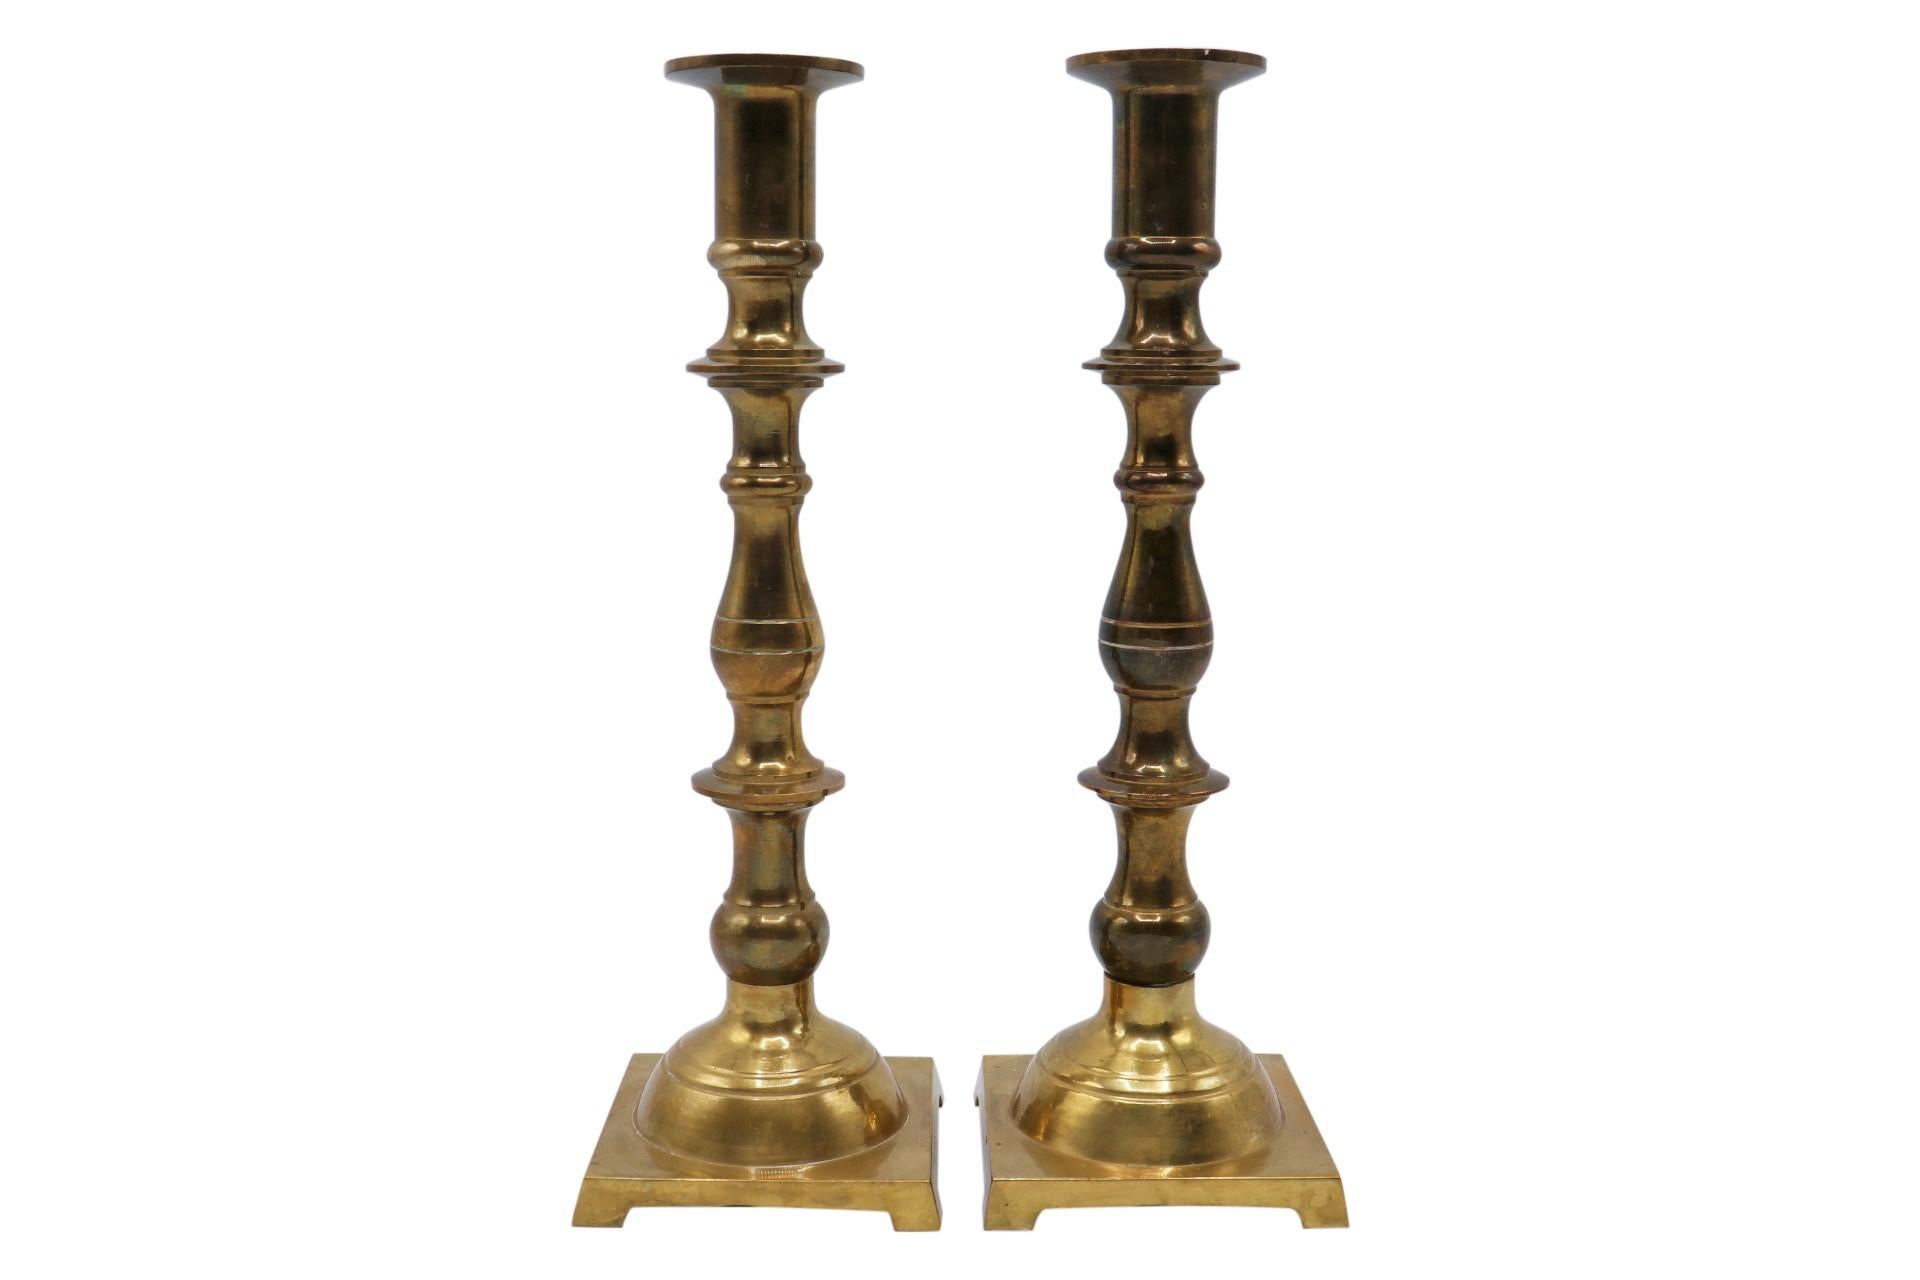 A pair of traditional turned candlesticks made of brass. Simple capitals top turned stems finished with domes above square feet. Dimensions per candlestick.